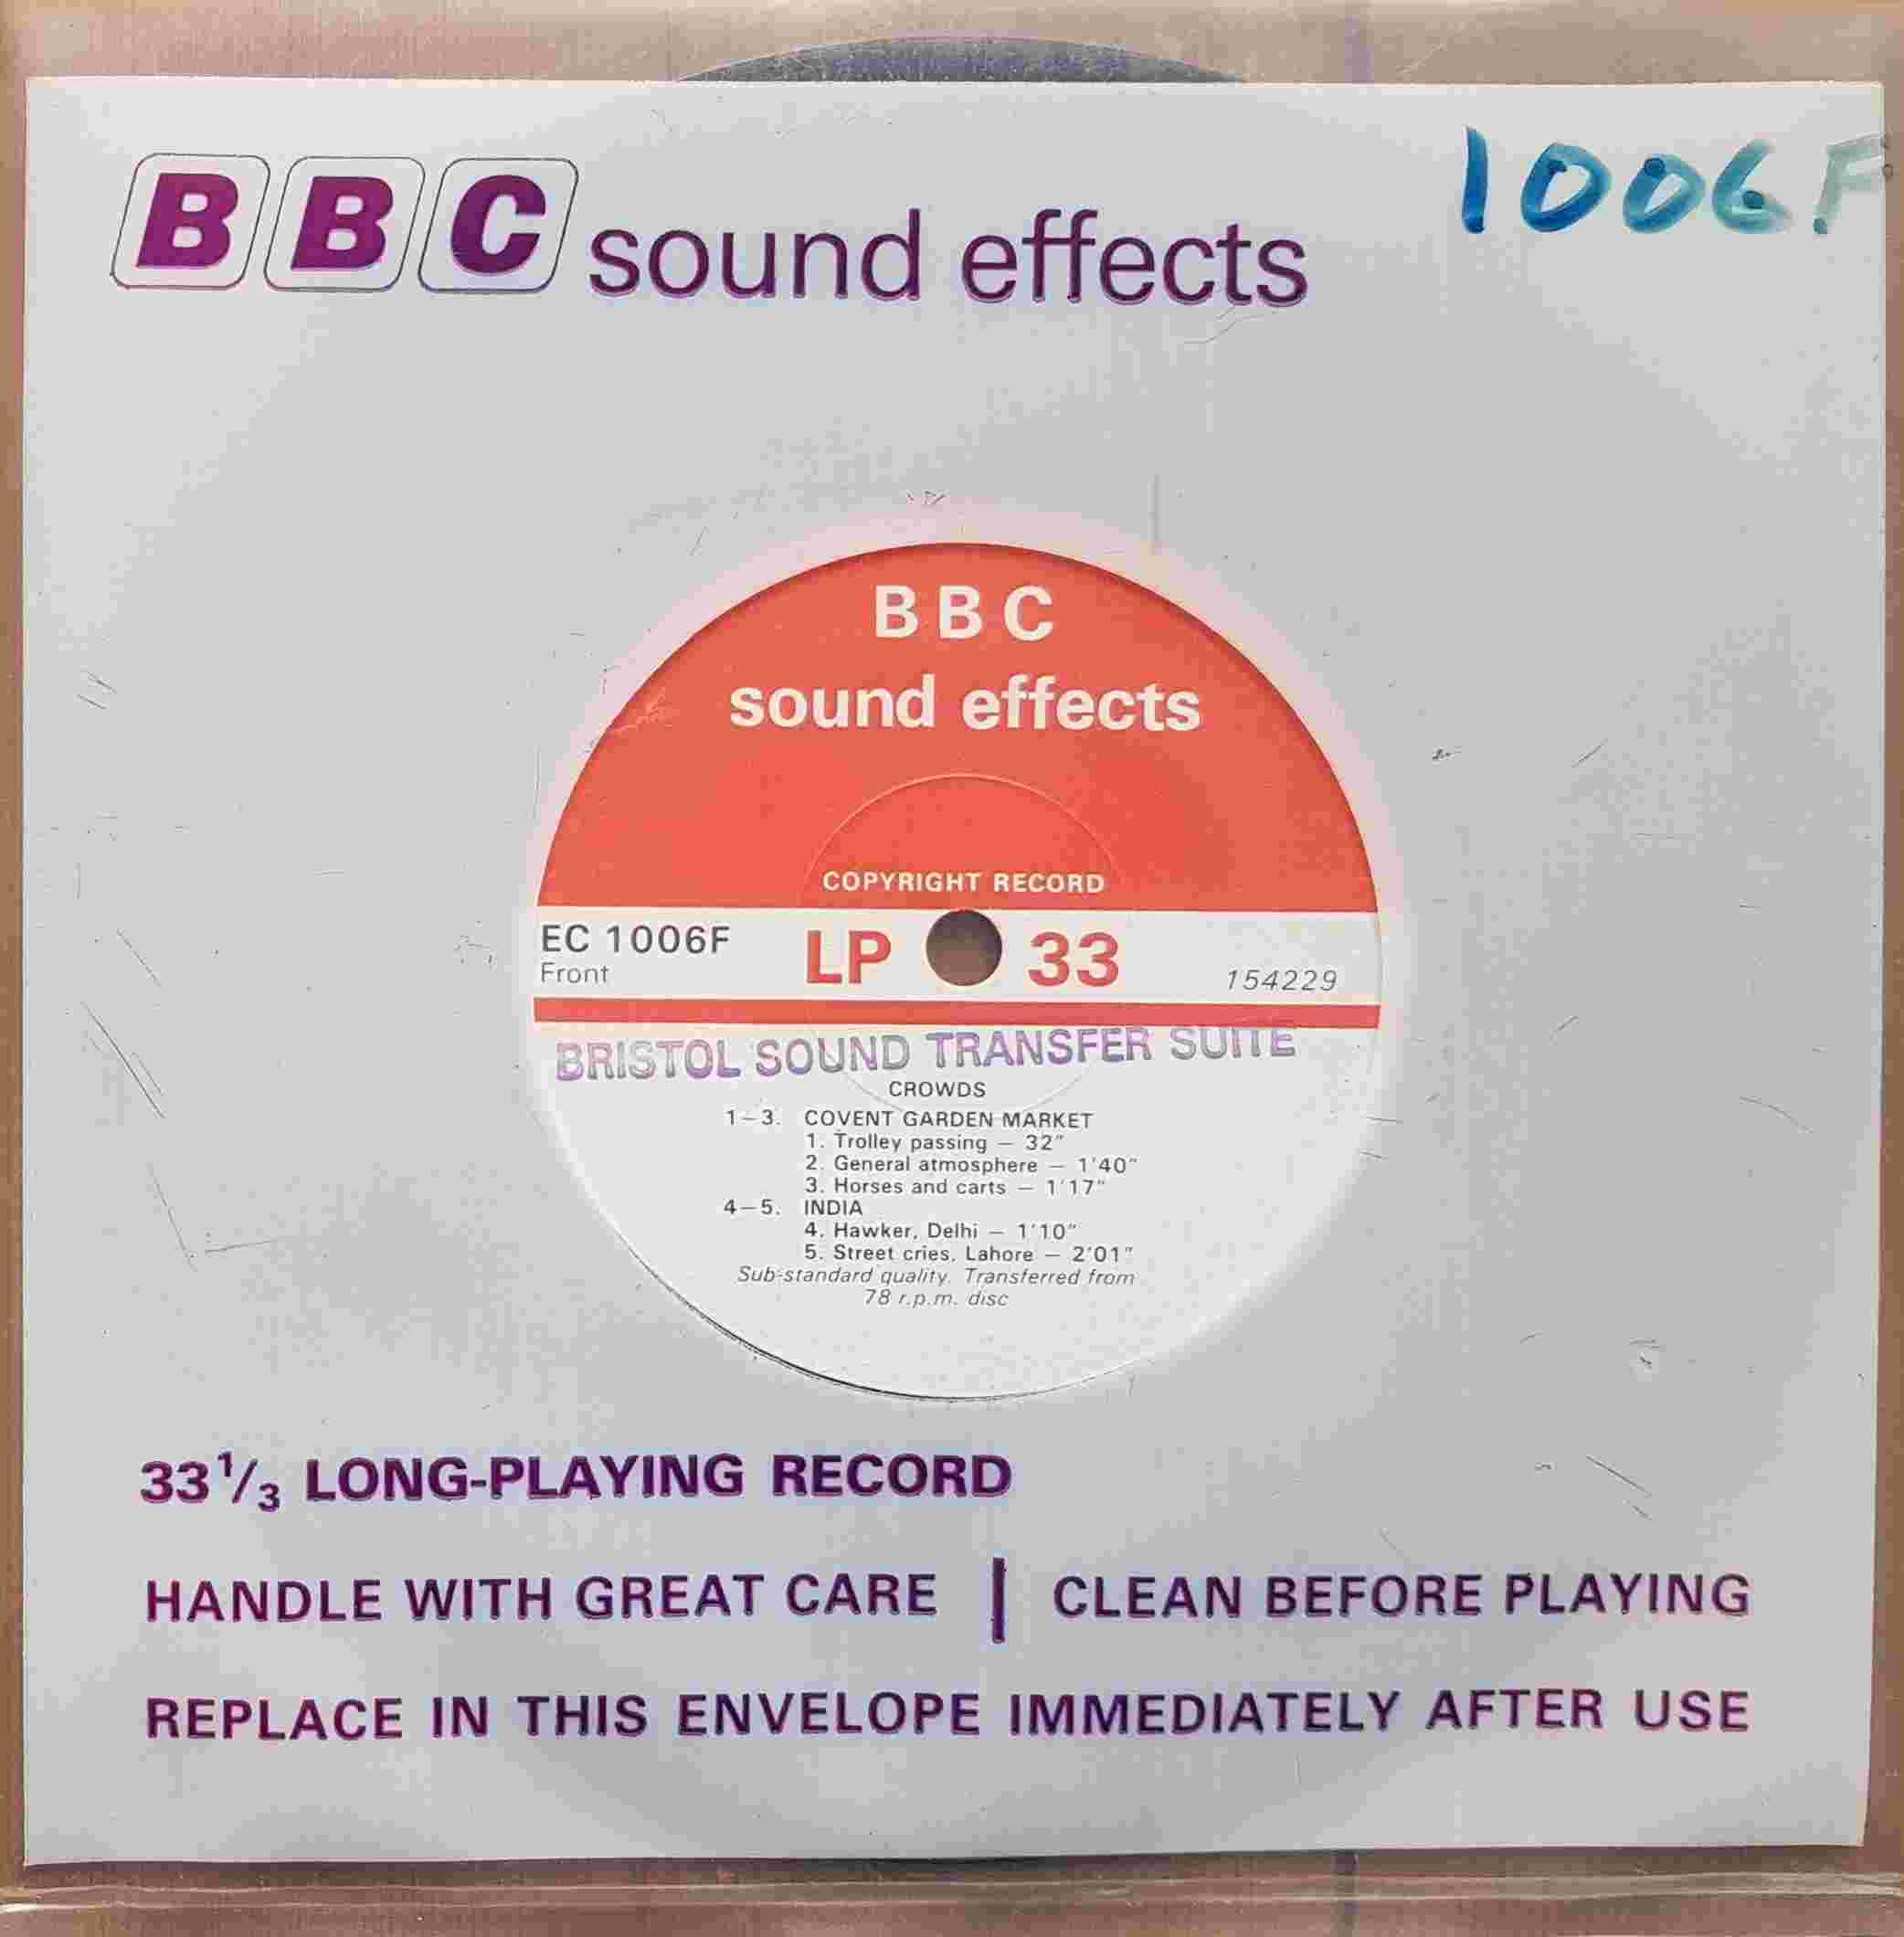 Picture of EC 1006F Crowds / Foreign atmospheres by artist Not registered from the BBC records and Tapes library